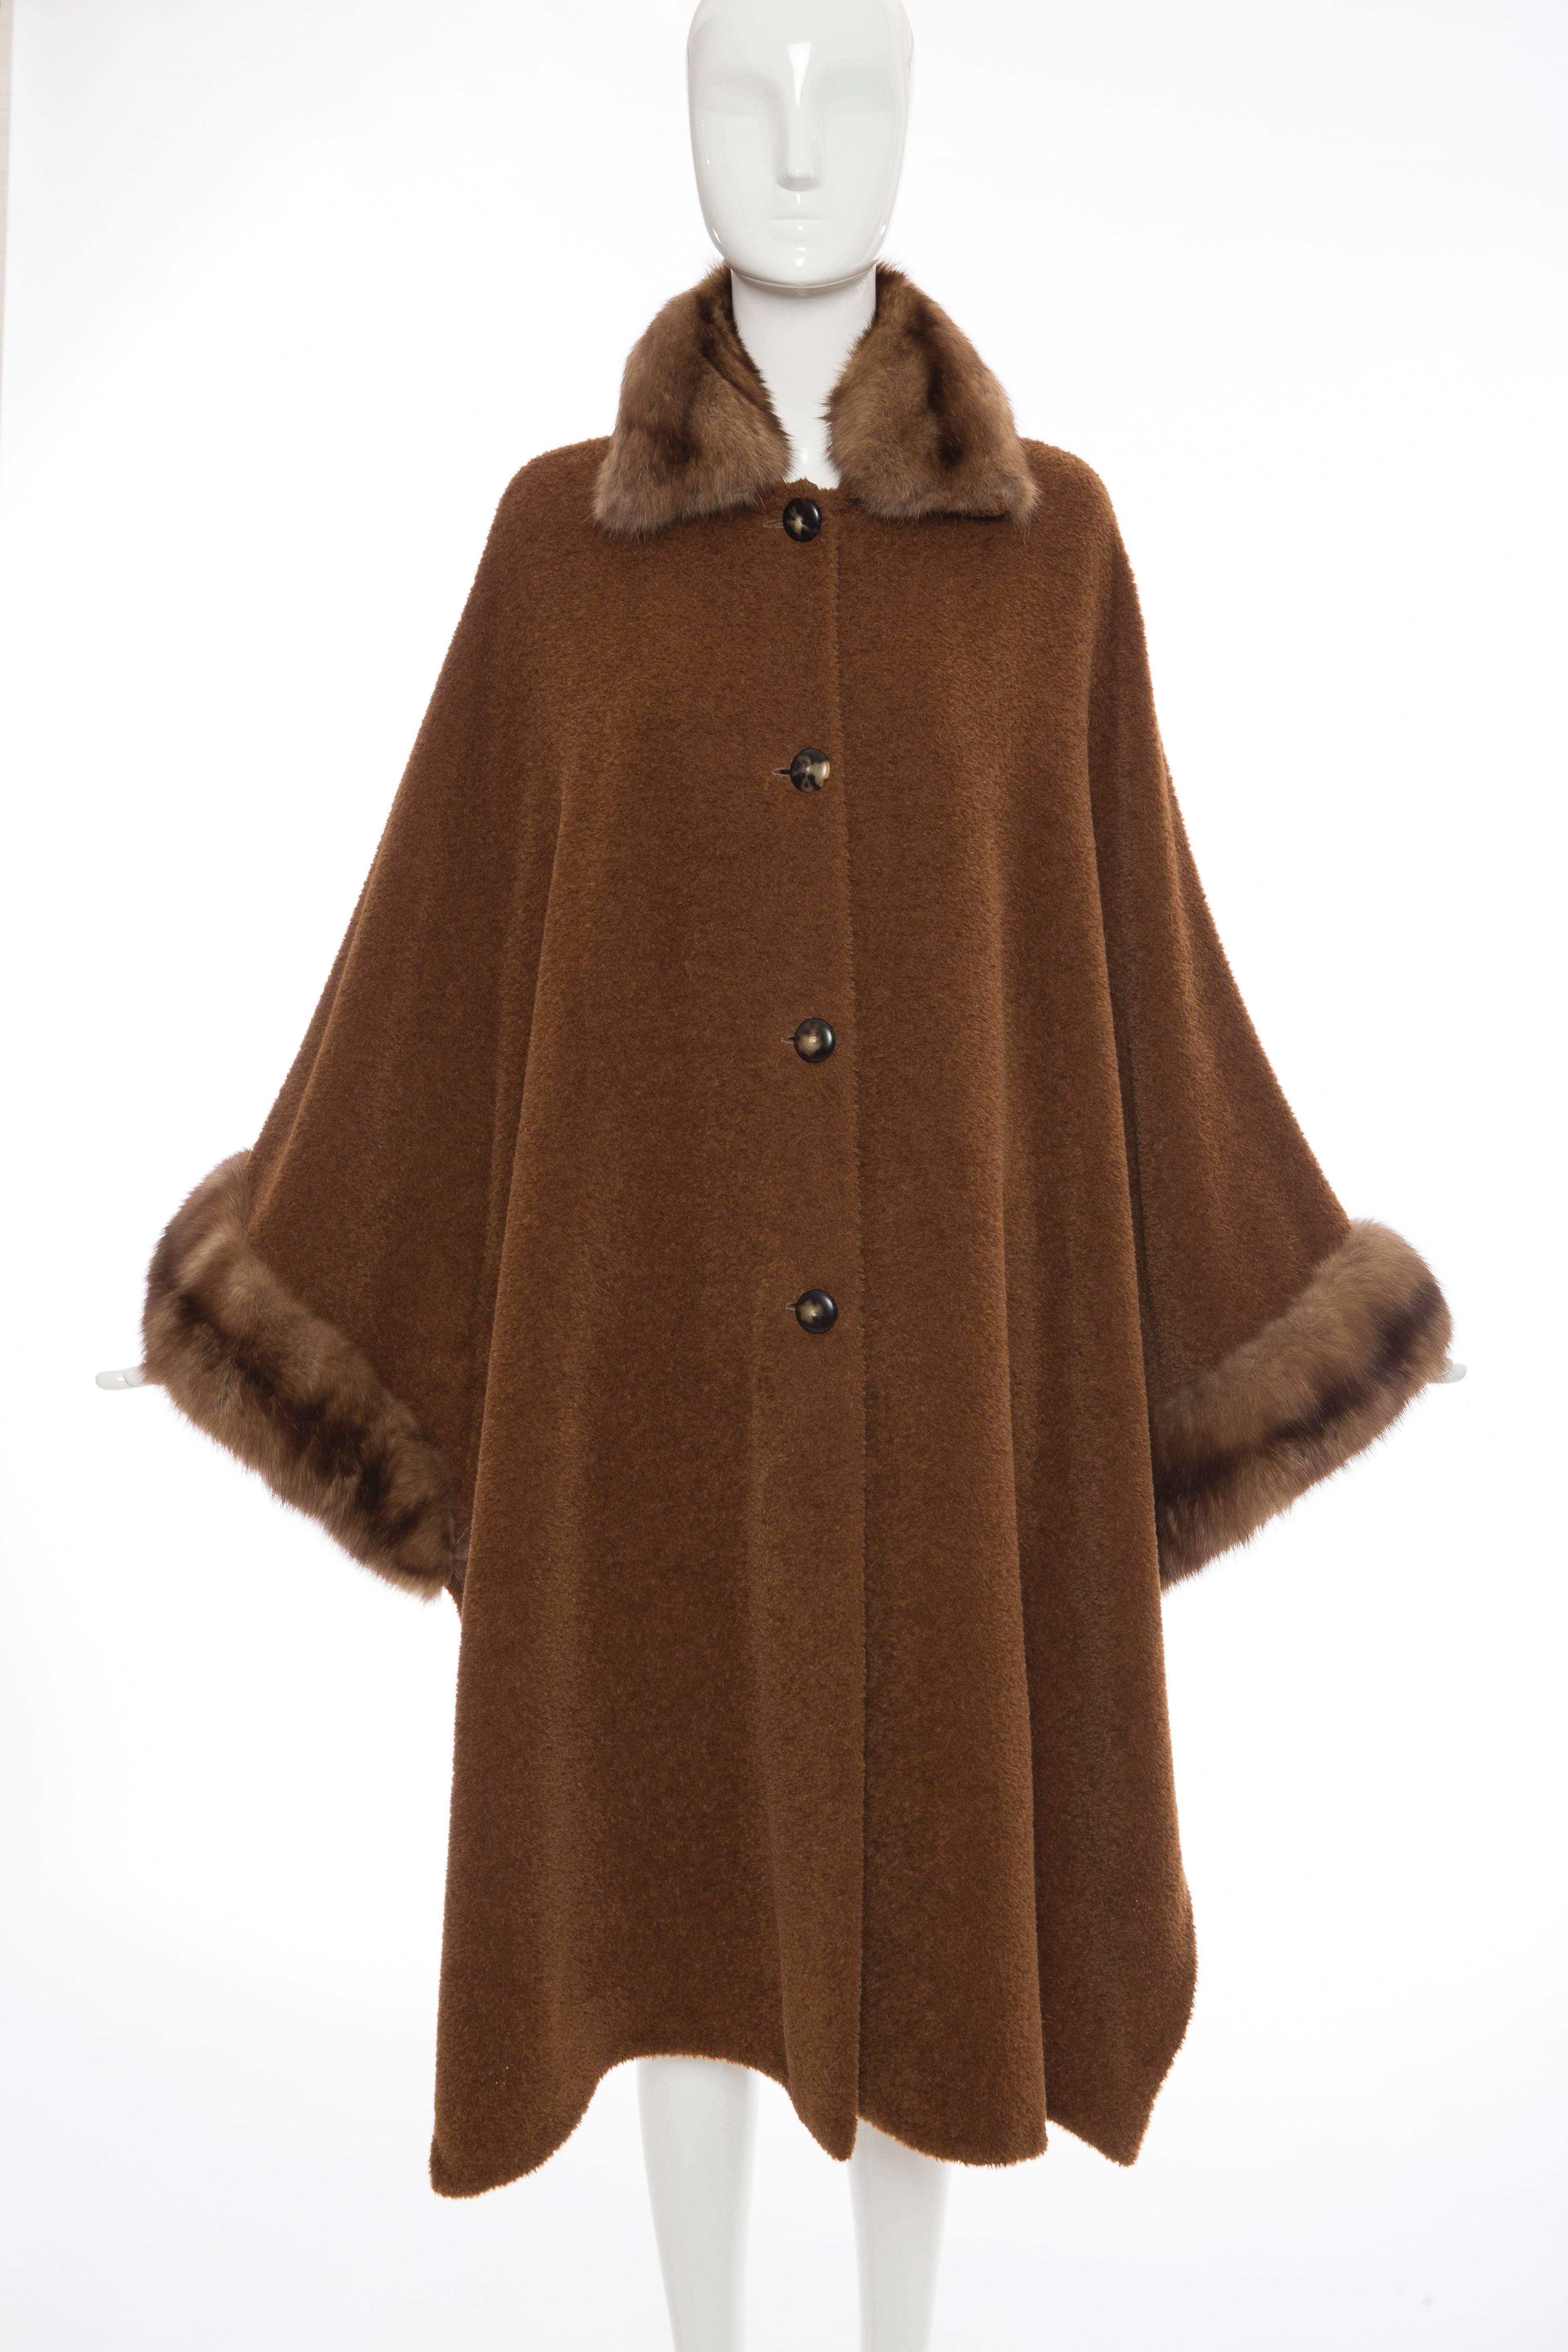 Revillon, late 20th Century, button front cinnamon alpaca cloak/cape with sable trim, side snap closures and one extra button.

No Size Label

Bust: 84, Waist: 84, Hips: 78, Length: 44